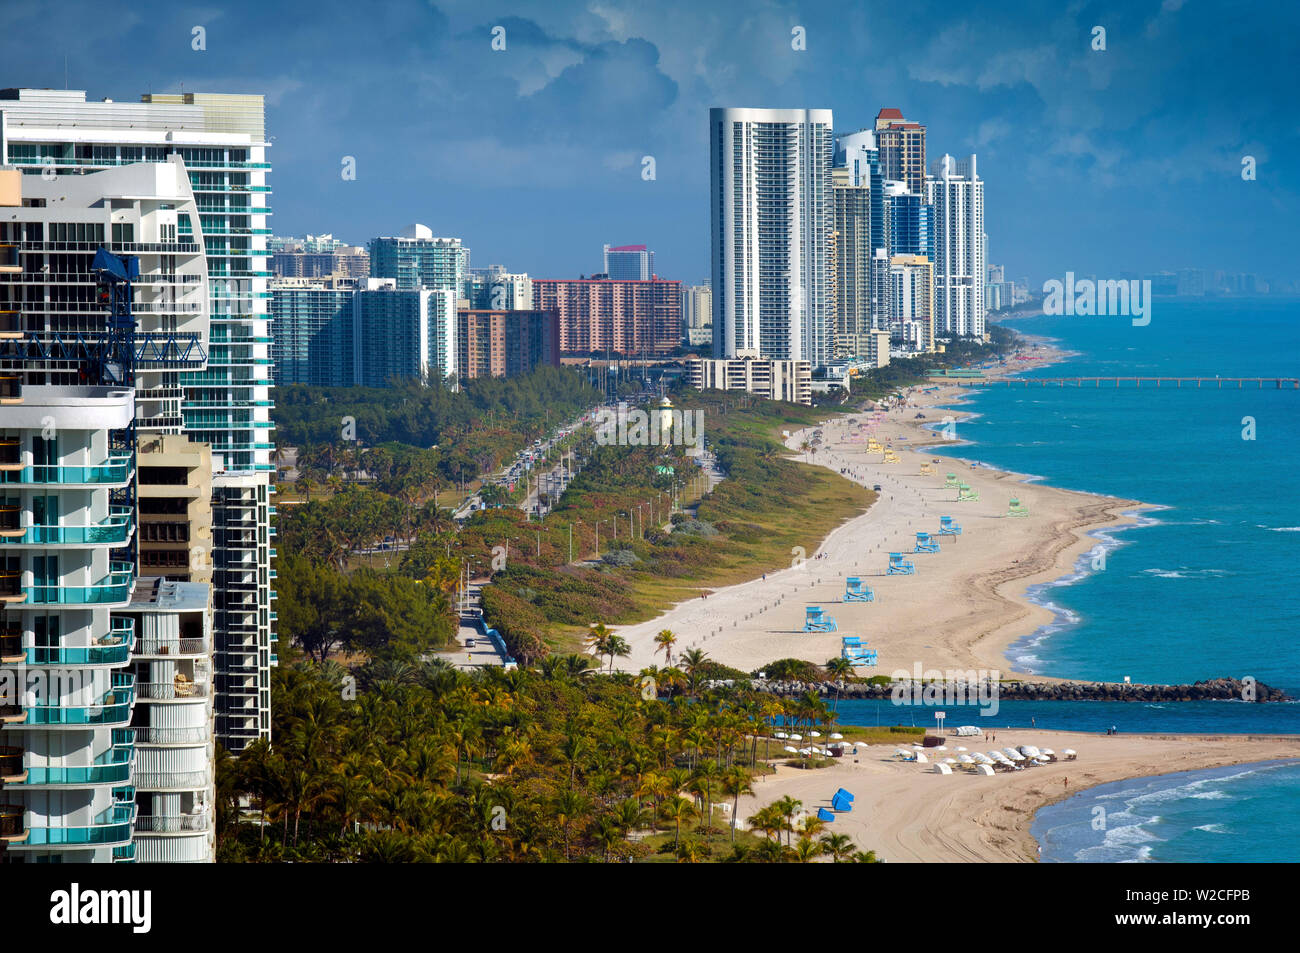 Florida, North Miami Beach, Bal Harbour Beach, Haulover Inlet Seperates Miami Beach From Haulover Beach Park And The High Rise Residential Condominiums Of The City Of Sunny Isles Beach Stock Photo